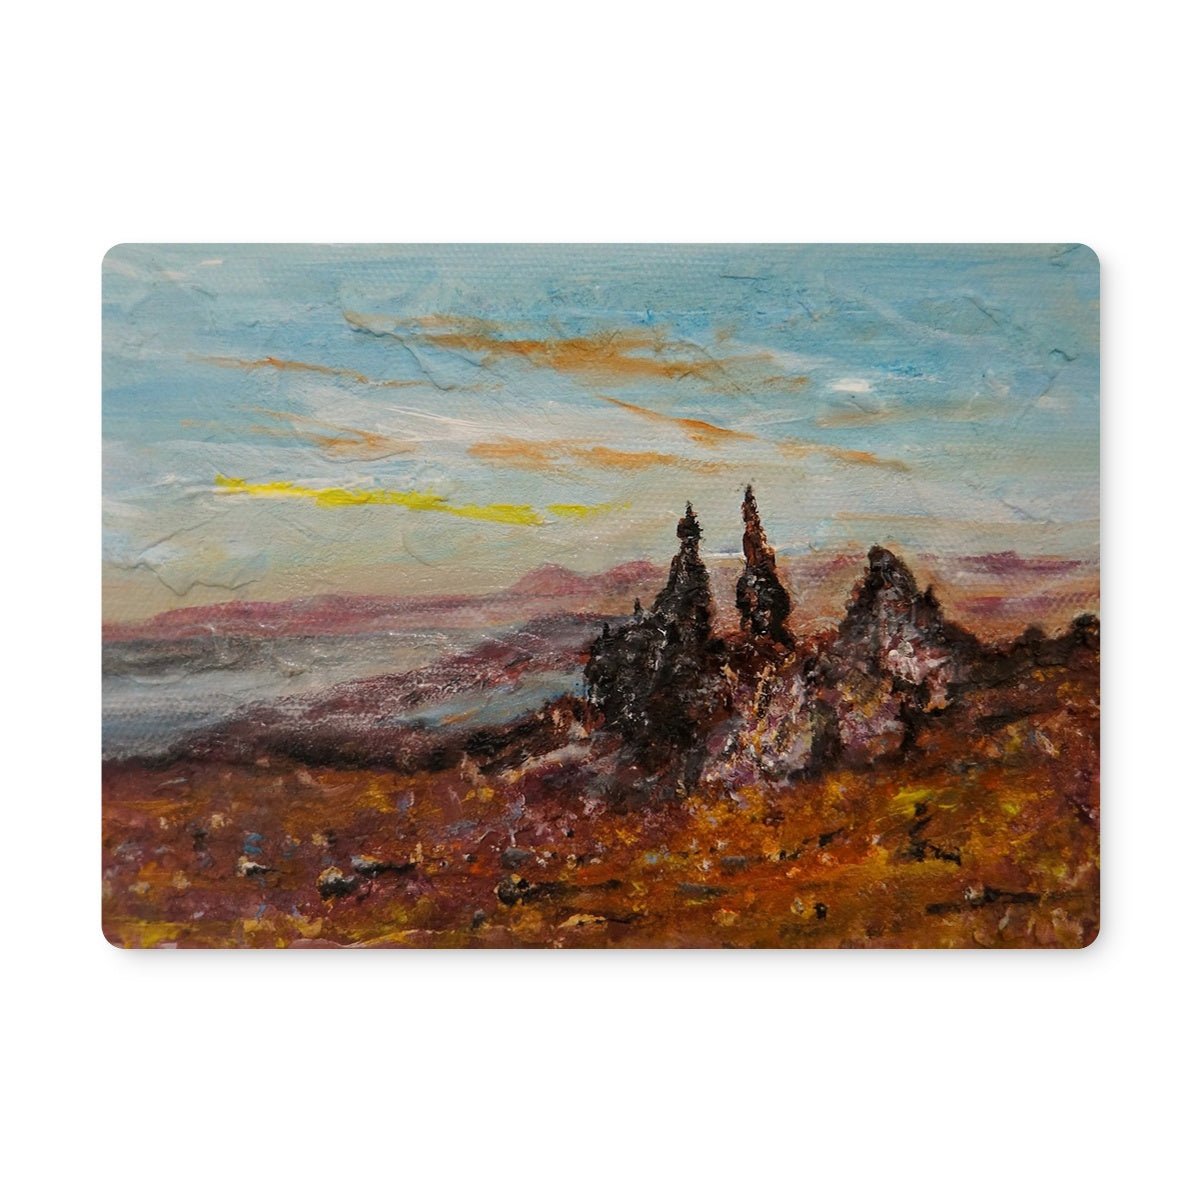 The Old Man Of Storr Skye Art Gifts Placemat-Placemats-Skye Art Gallery-Single Placemat-Paintings, Prints, Homeware, Art Gifts From Scotland By Scottish Artist Kevin Hunter